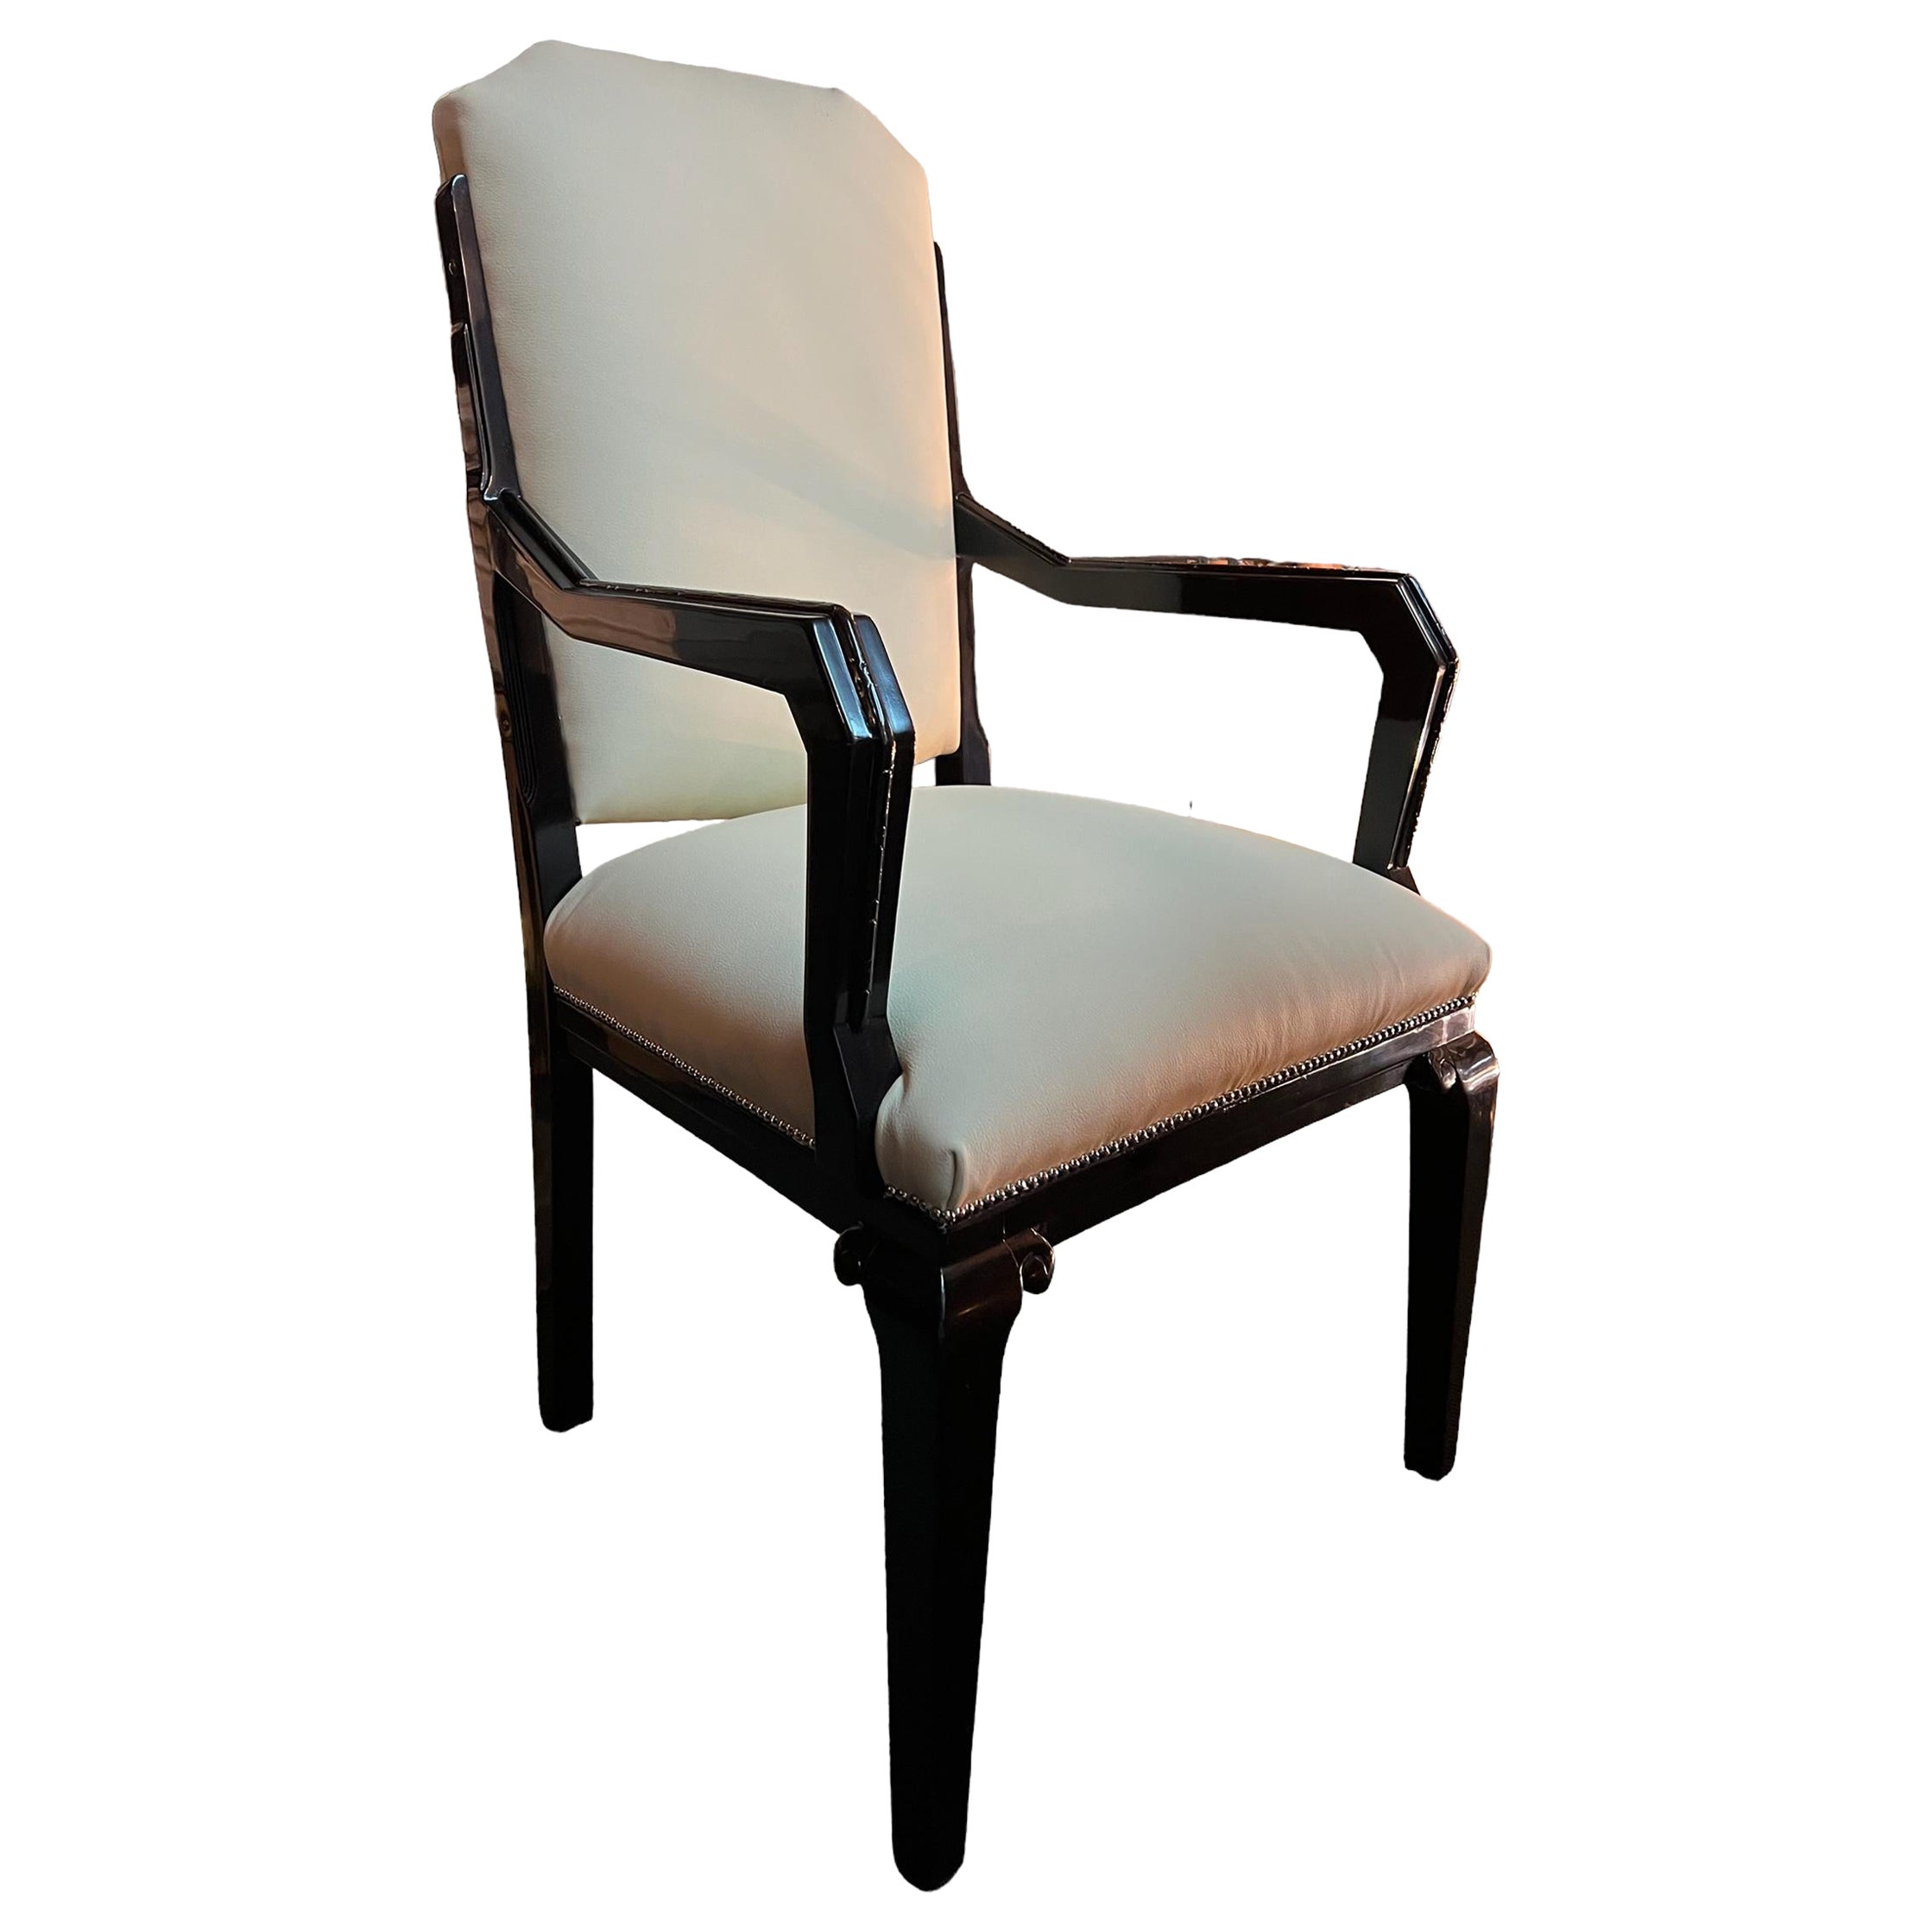 Desk Chair in Leather and Wood, Style: Art Deco, France, 1930 For Sale